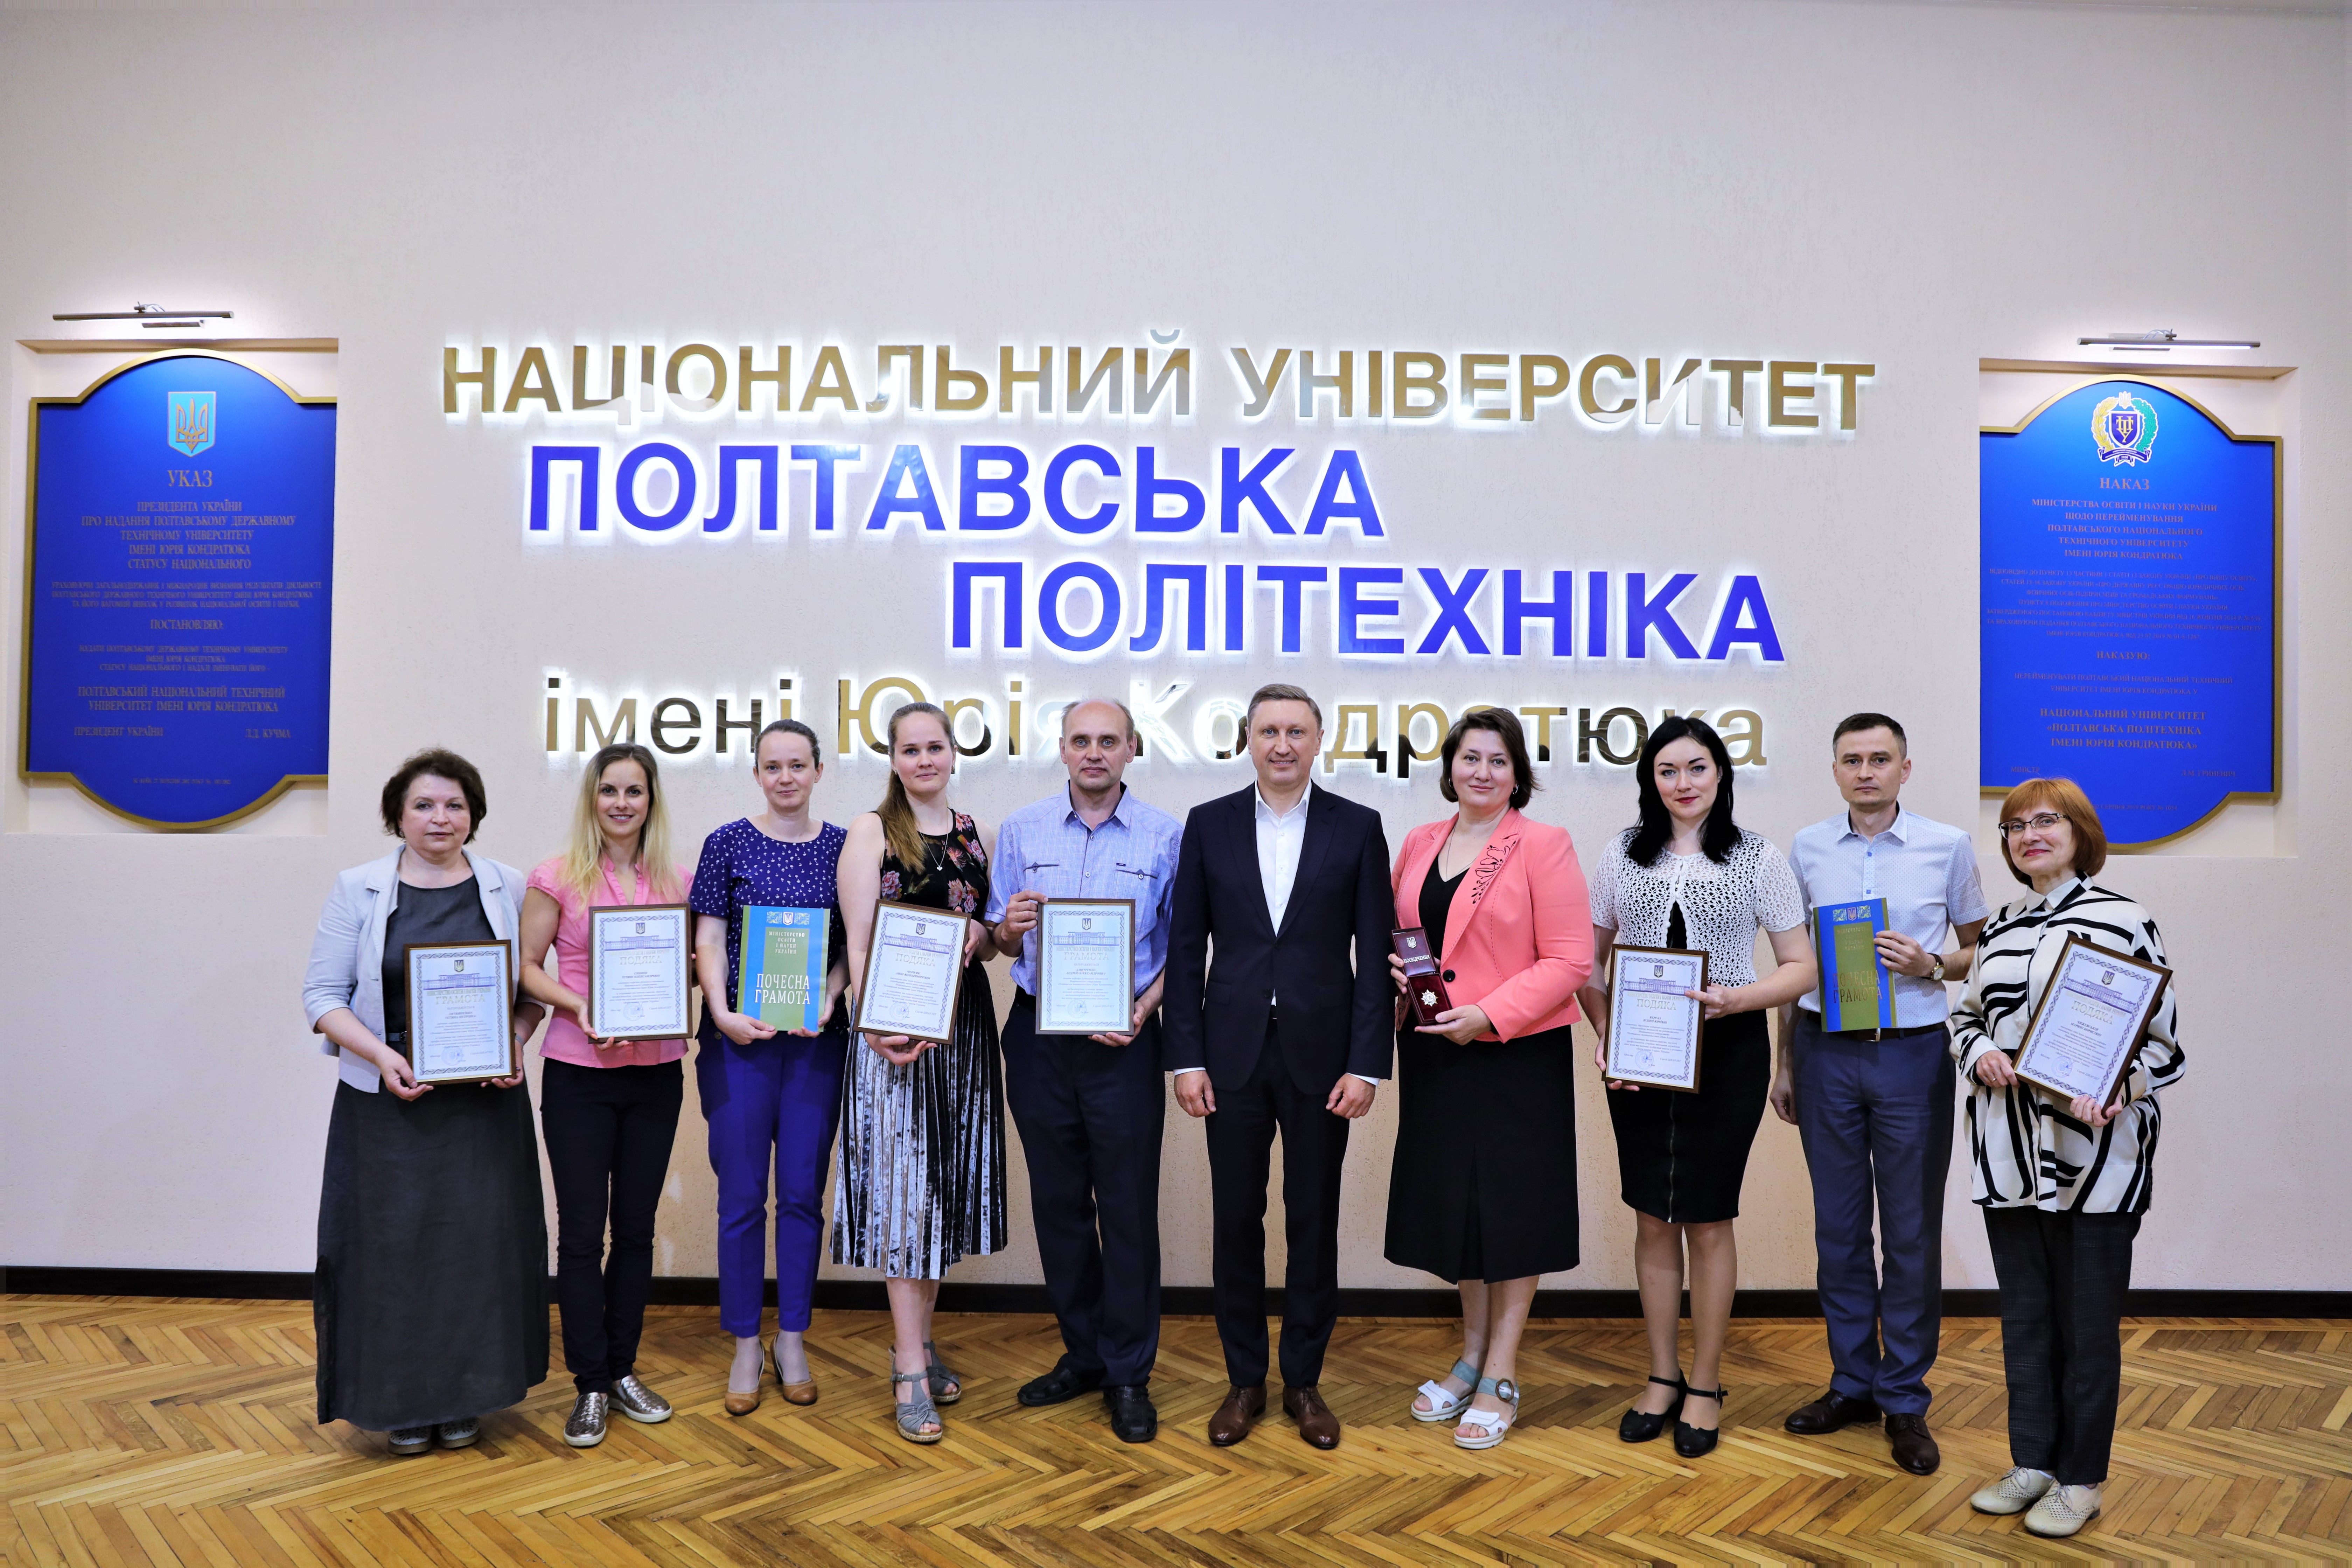 9 scientific and pedagogical workers of the Poltava Polytechnic are awarded by the MES